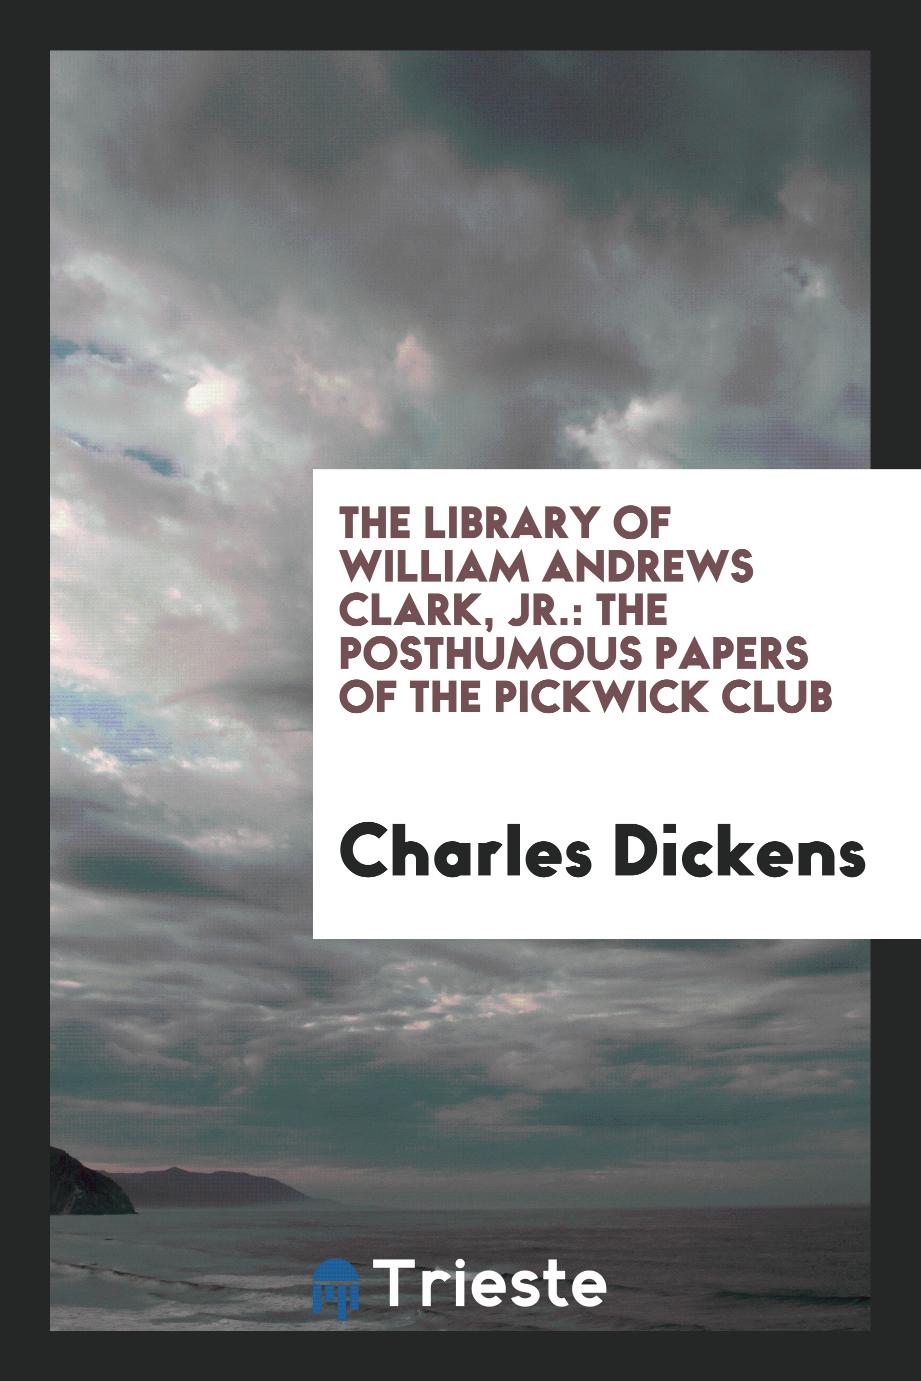 The Library of William Andrews Clark, Jr.: The Posthumous Papers of the Pickwick Club